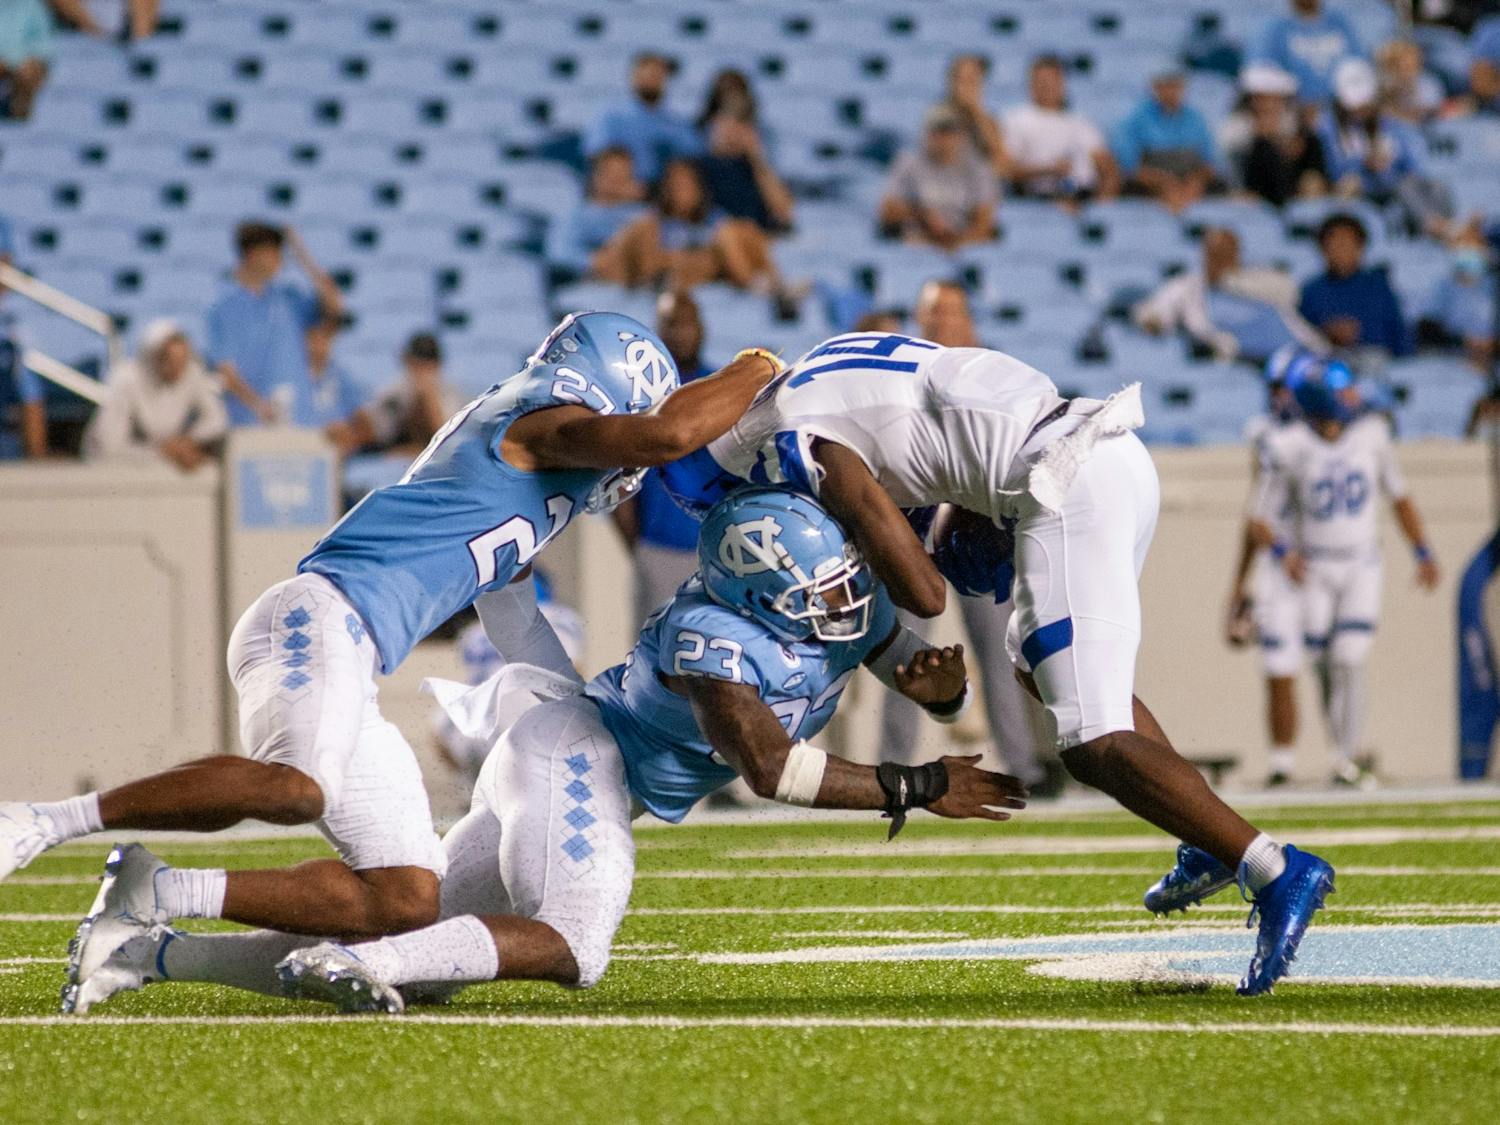 UNC junior defensive back Giovanni Biggers (27) and first year linebacker Power Echols (23) tackle a Georgia State player at the game on Sept. 11 at Kenan Stadium. UNC won 59-17.